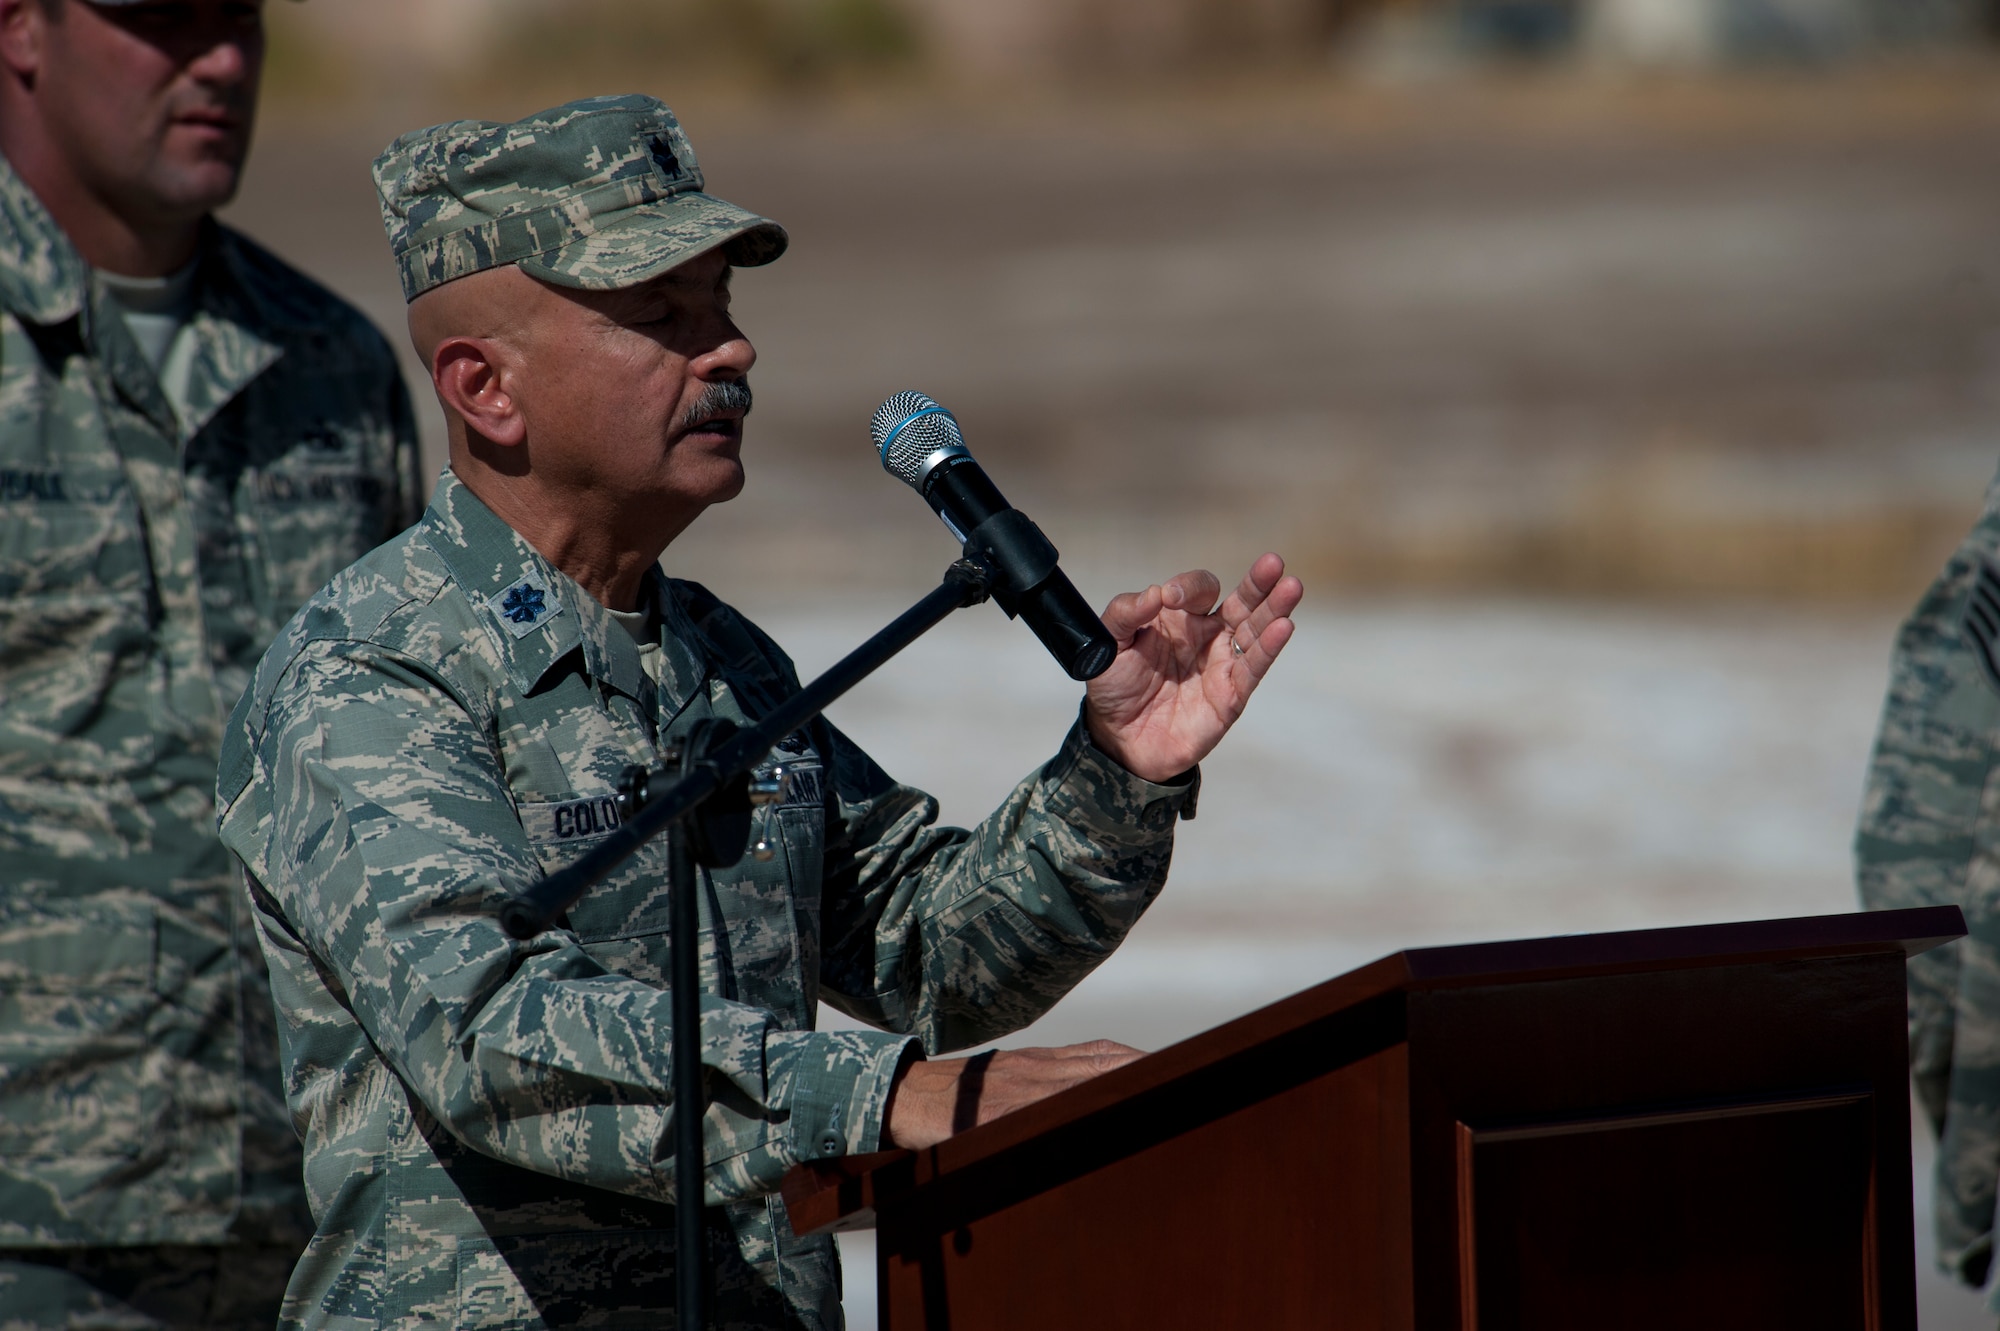 Lieutenant Col. Hector Coloncolon, 49th Wing chaplain, delivers the invocation during the 54th Fighter Group activation at Holloman Air Force Base, N.M., March 11. The 54th Fighter Group, a tenant unit at Holloman, is a detachment the 56th Fighter Wing at Luke Air Force Base, Ariz., and will ultimately operate two F-16 Fighting Falcon aircraft training squadrons. The 54th Fighter Group plus three squadrons were activated at the ceremony: the 311th Fighter Squadron, the 54th Operations Support Squadron and the 54th Aircraft Maintenance Squadron. (U.S. Air Force photo by Airman 1st Class Aaron Montoya / Released)